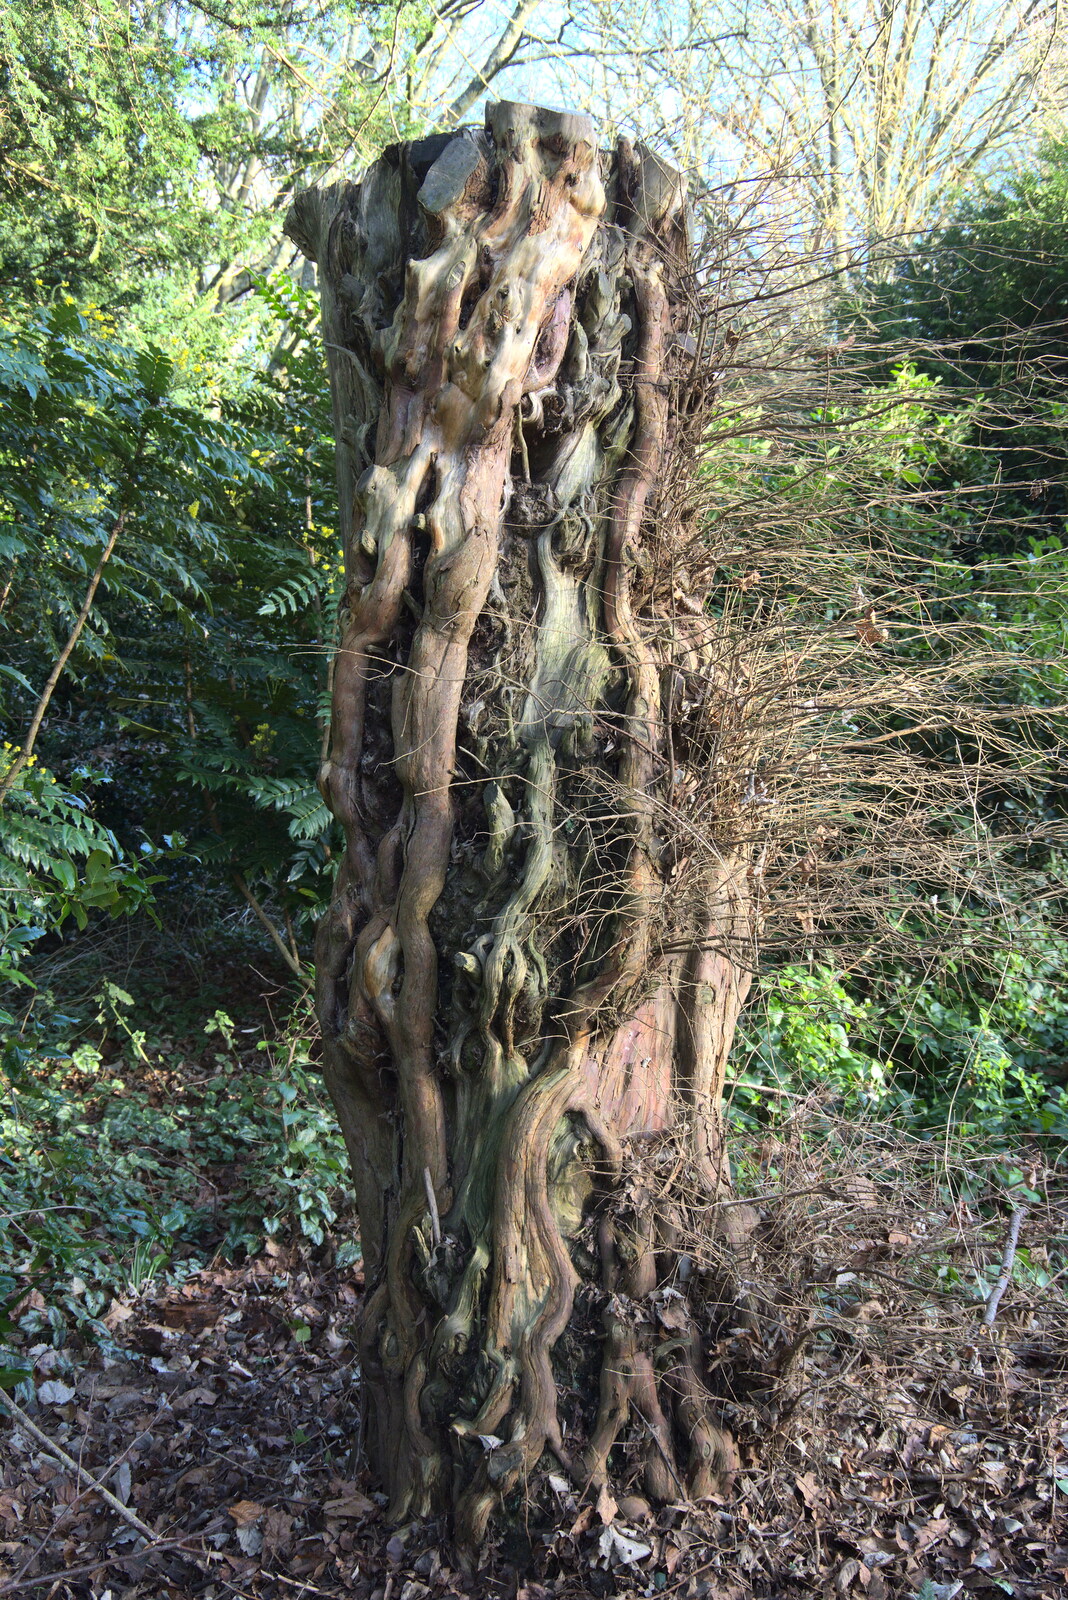 A curious gnarled tree trunk from A Visit to Blickling Hall, Aylsham, Norfolk - 9th January 2022